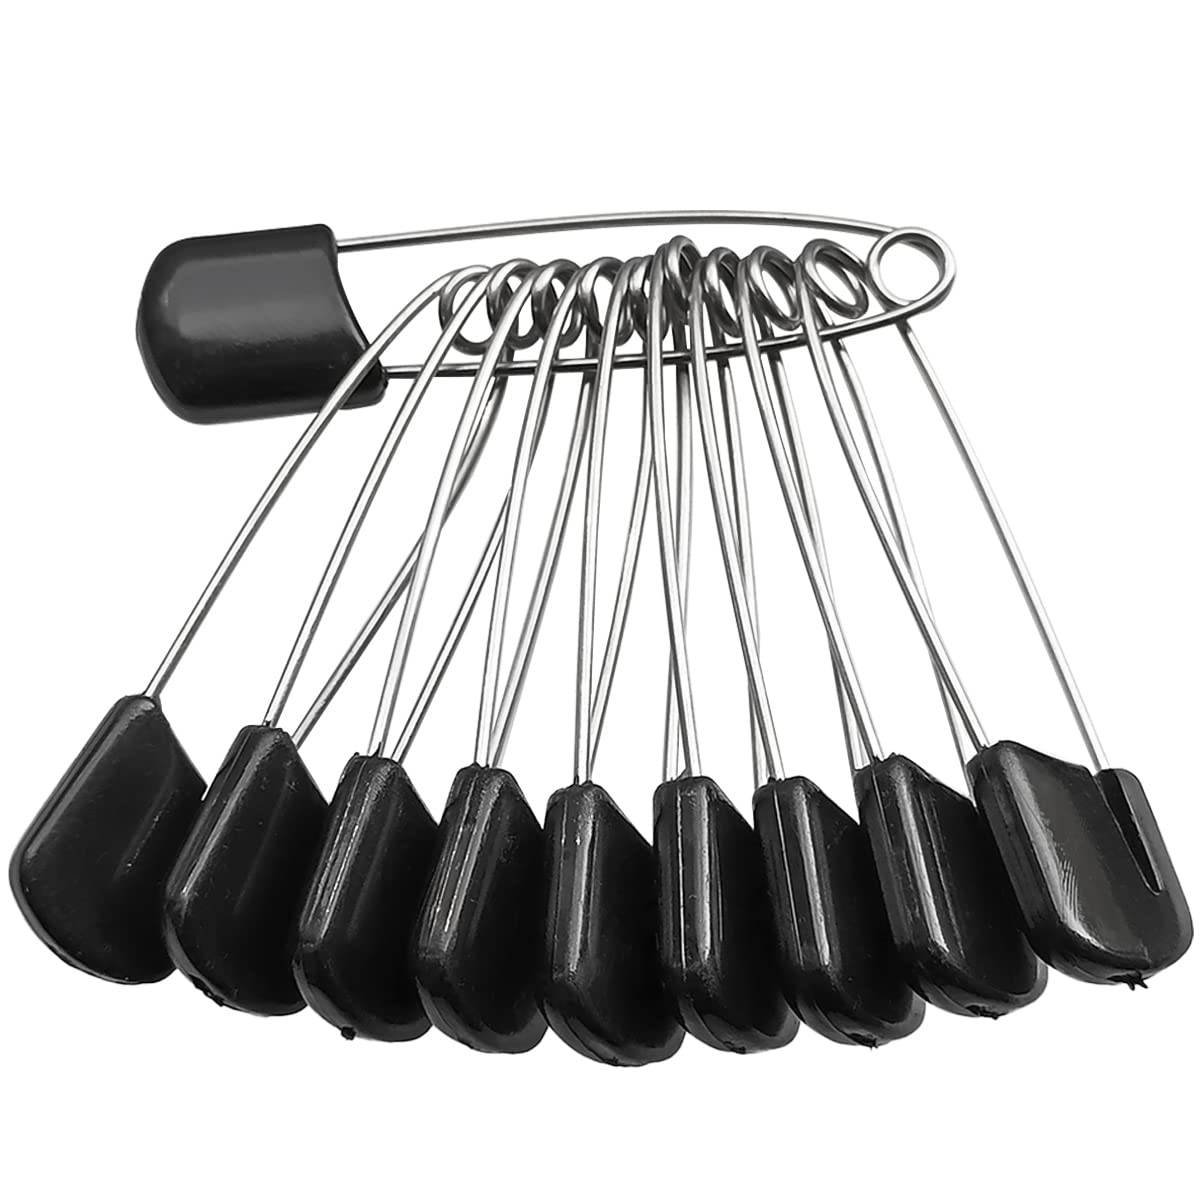 50 Pcs Diaper Pins, Plastic Head Safety Pin with Safe Locking Closures (Black)